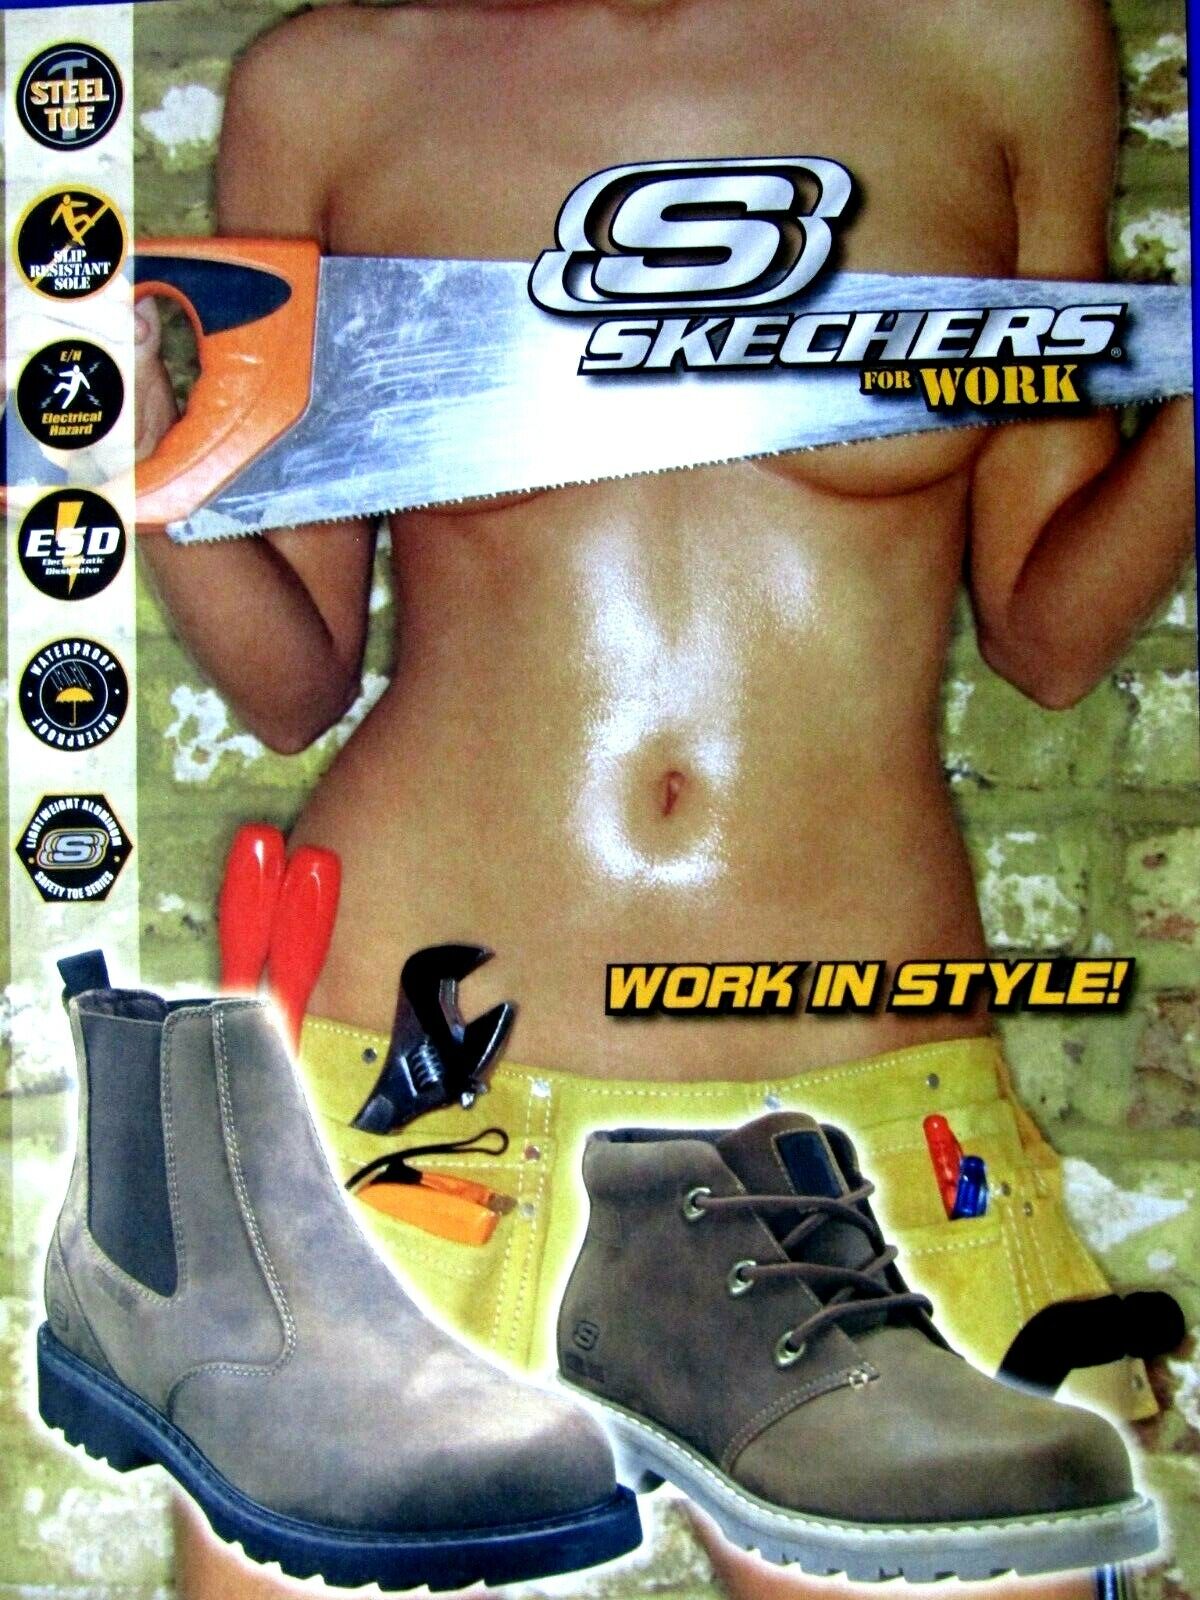 2007 SKECHERS Hot Girl With Saw For Work Original Print Ad 8.5 x 11